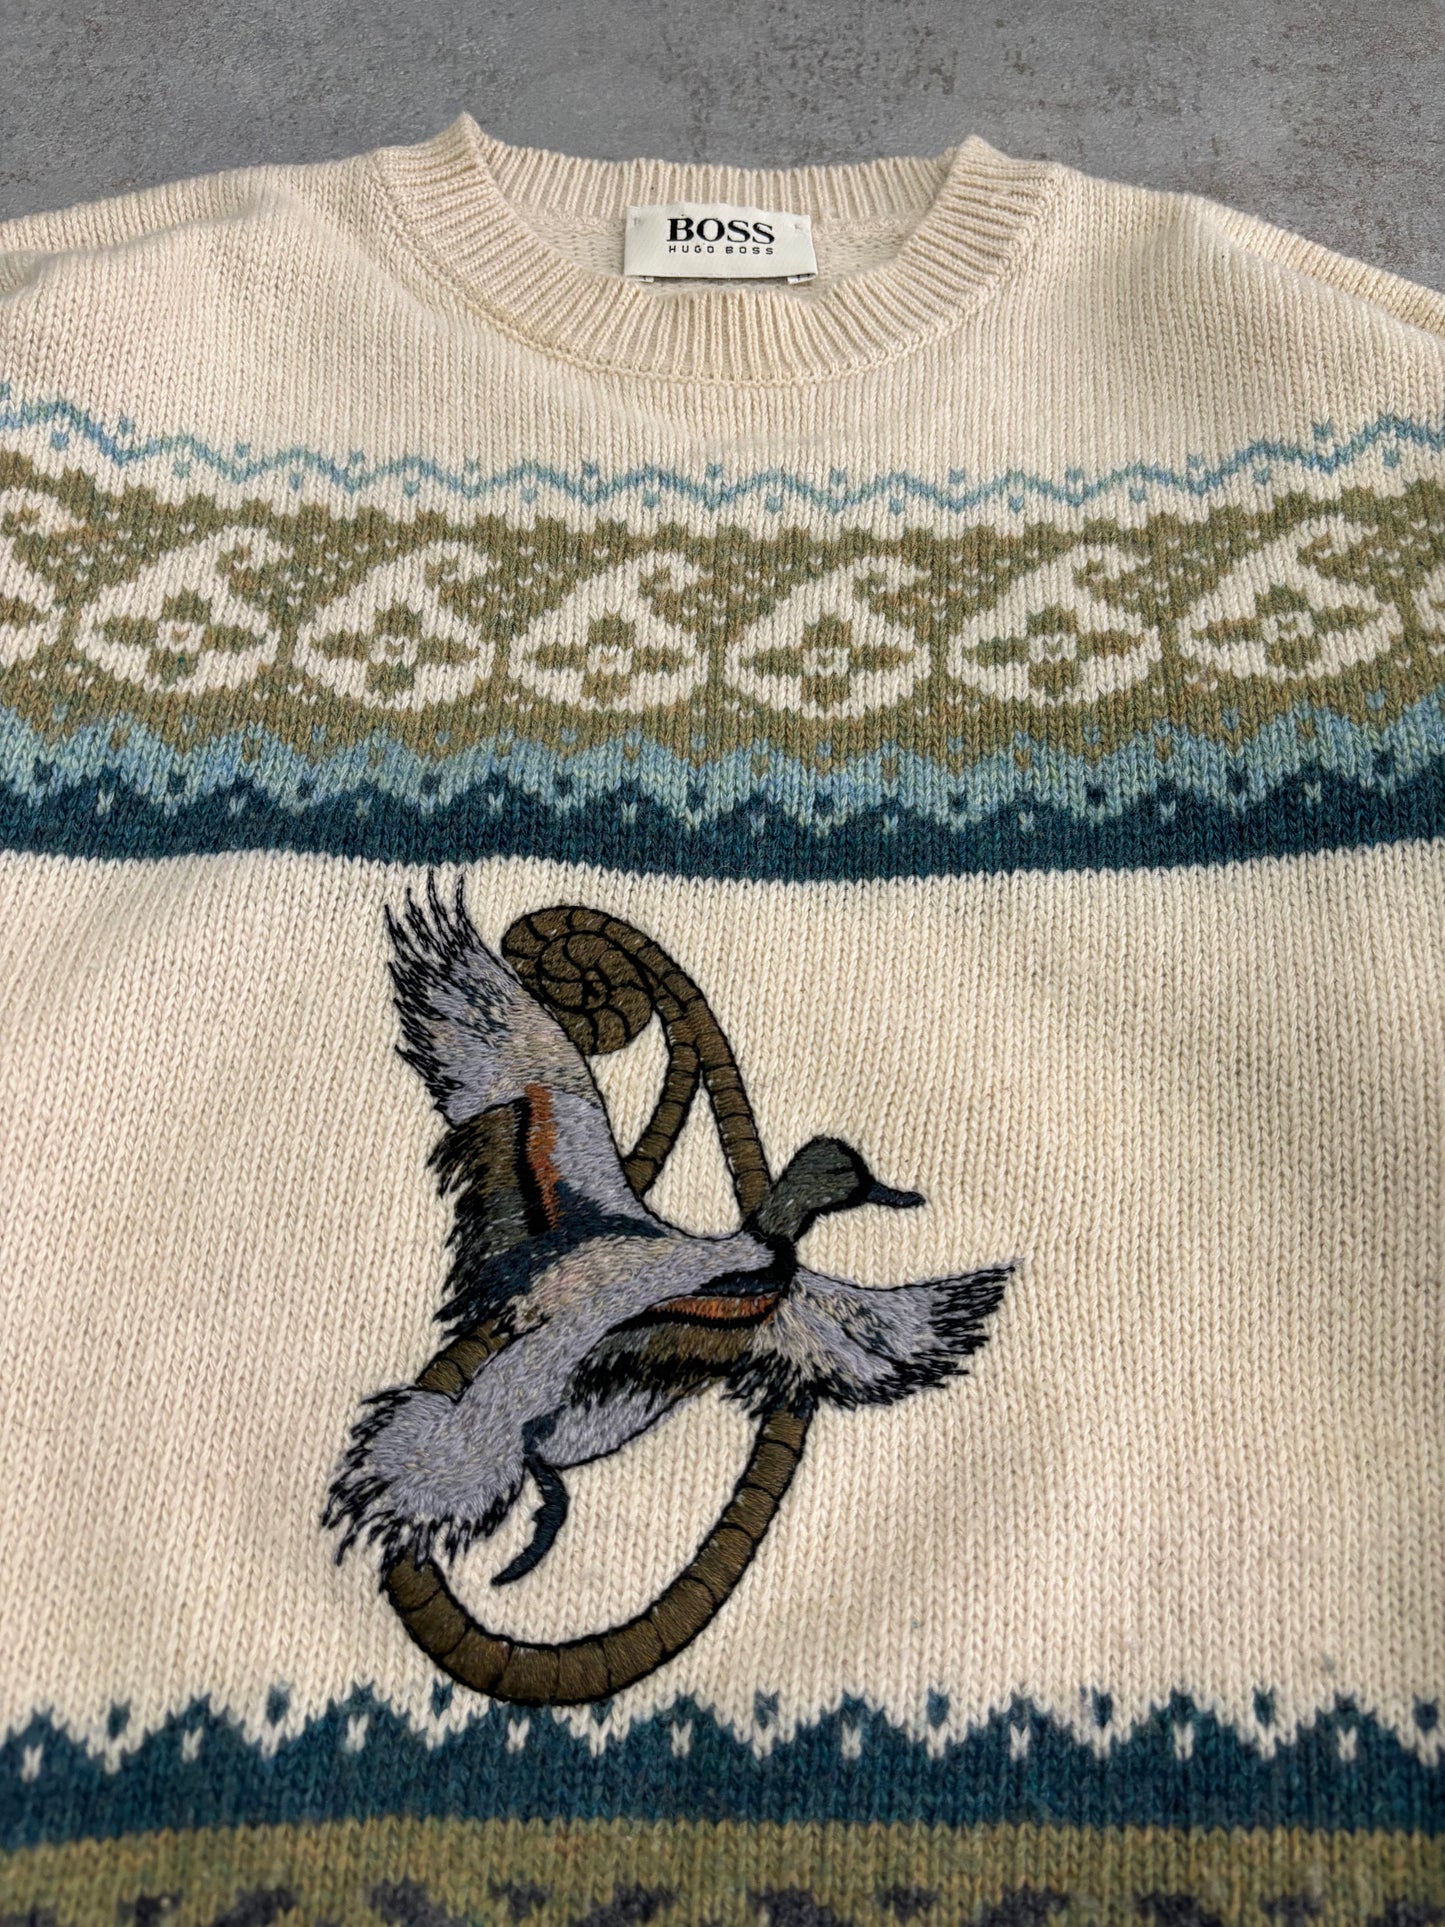 Hugo Boss 'All Embroidered' 90s Vintage Sweater - M